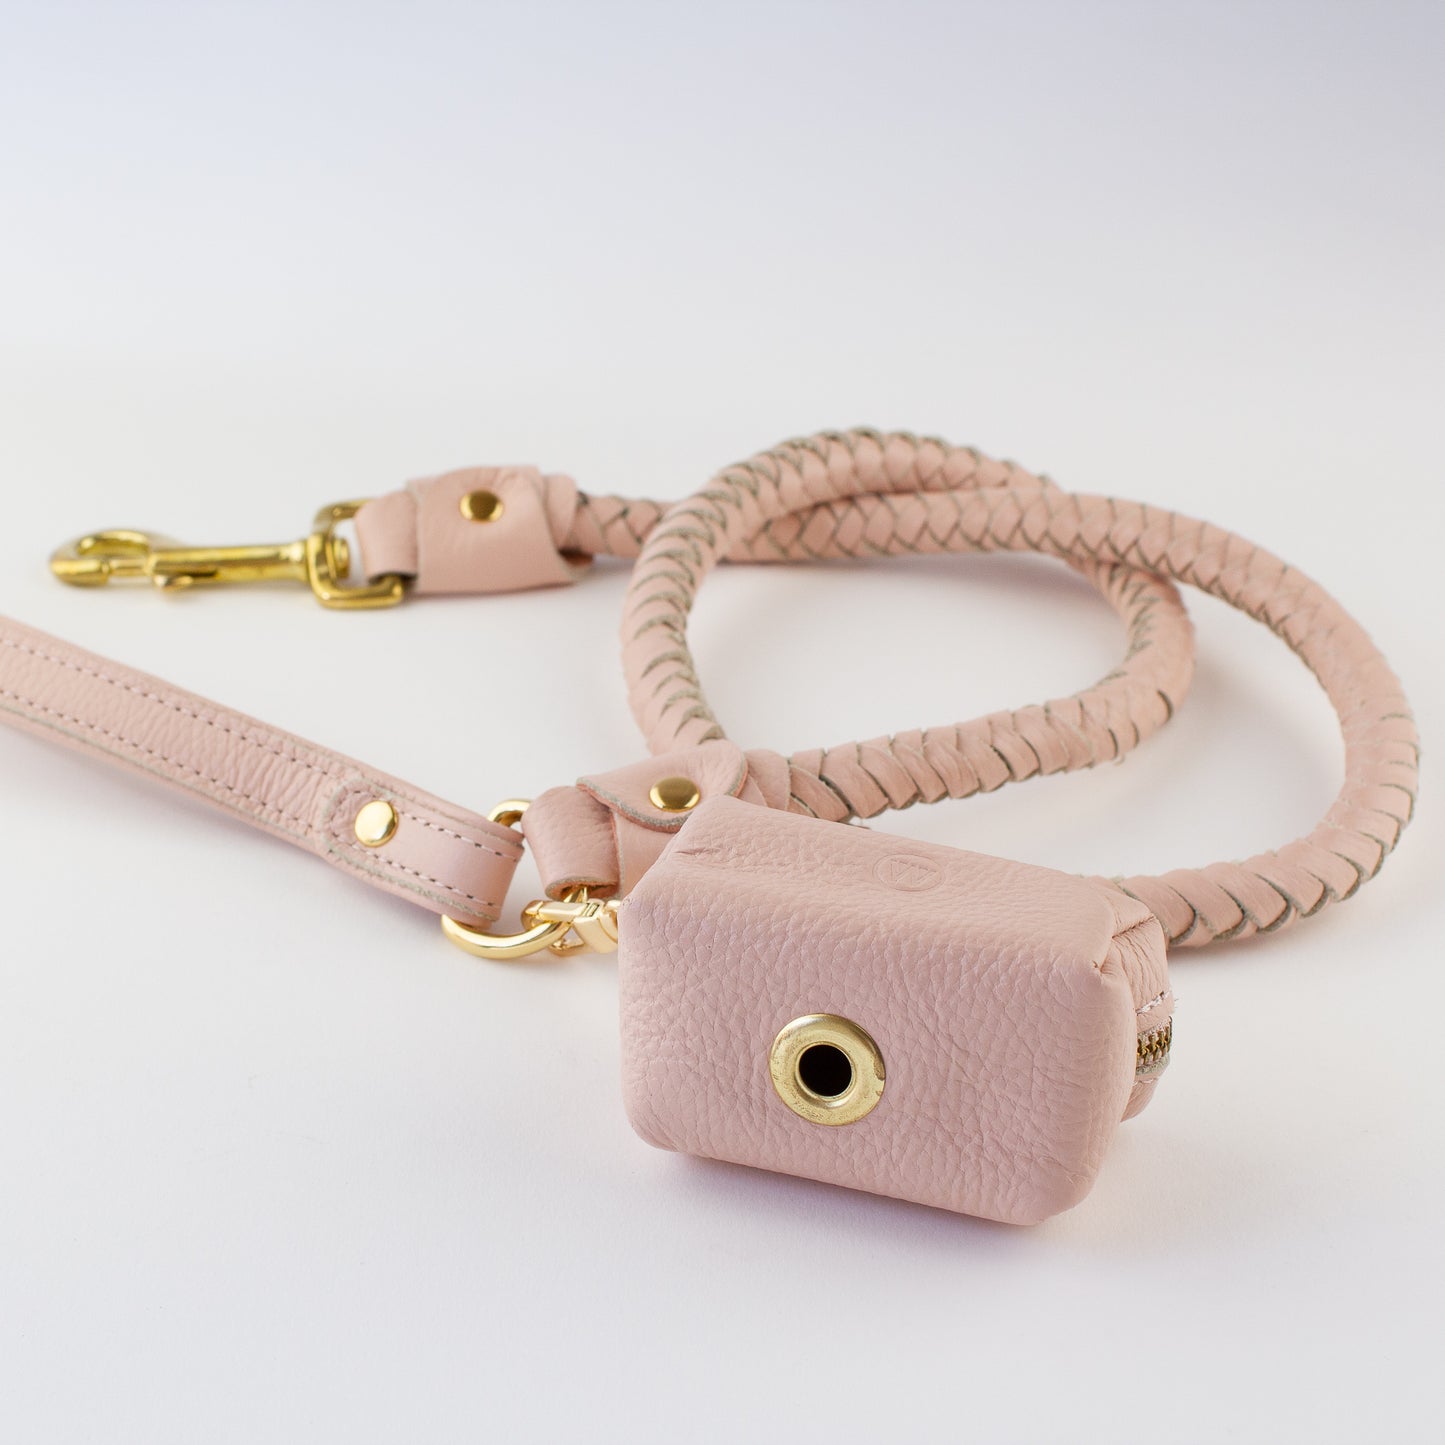 Pink leather dog accessories Willow Walks